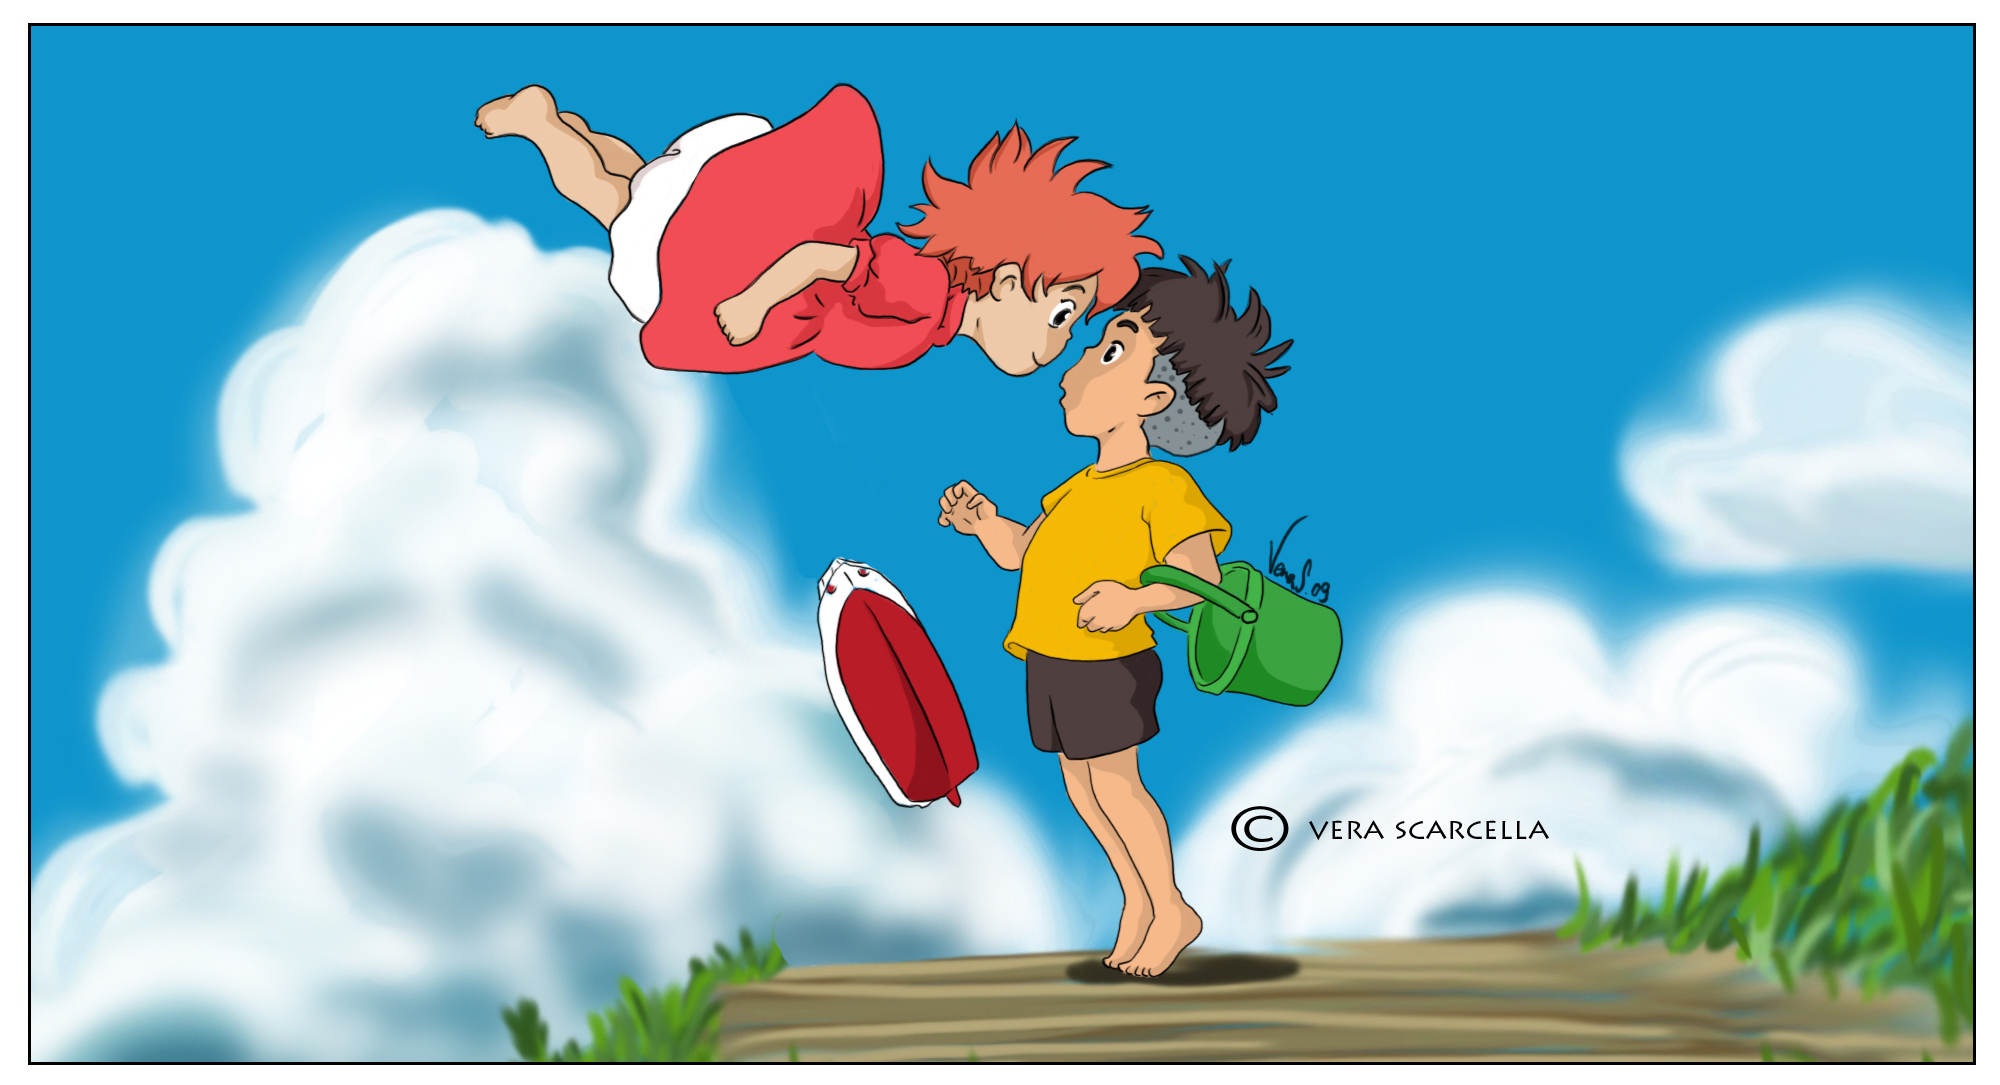 Ponyo Backgrounds, Compatible - PC, Mobile, Gadgets| 2000x1085 px